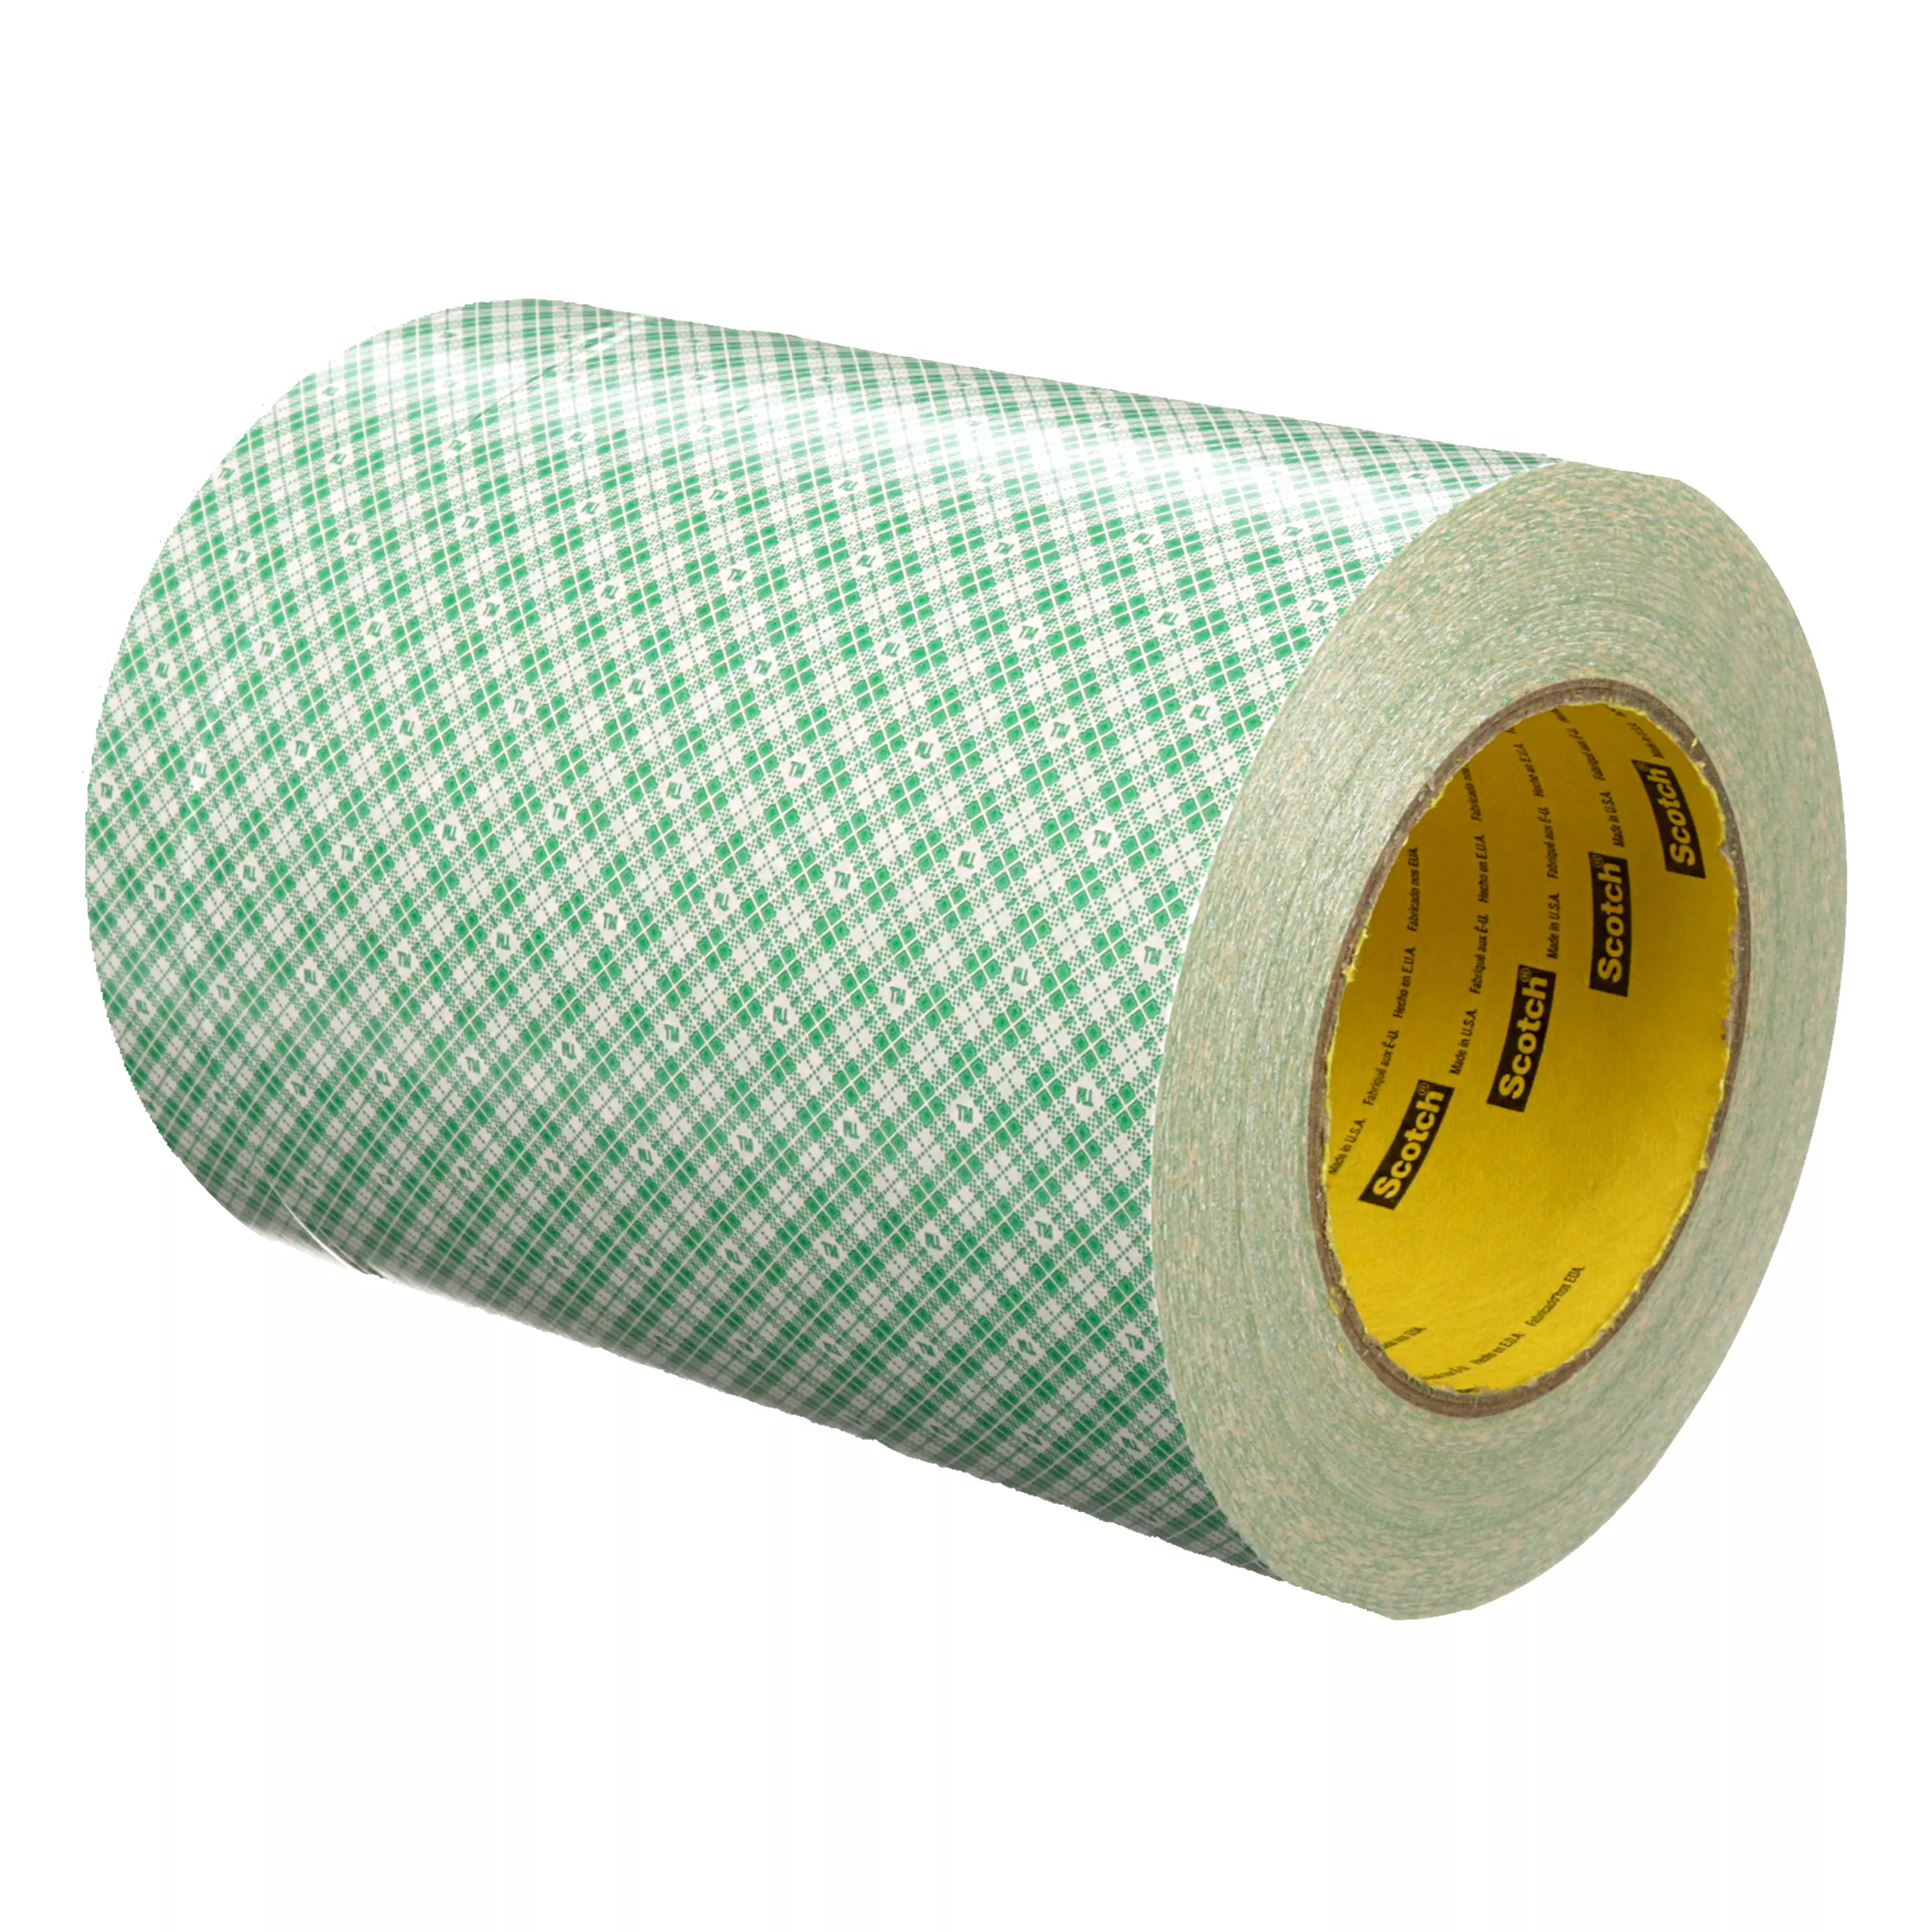 3M™ Double Coated Paper Tape 410M, Natural, 6 in x 36 yd, 5 mil, 8 rolls
per case